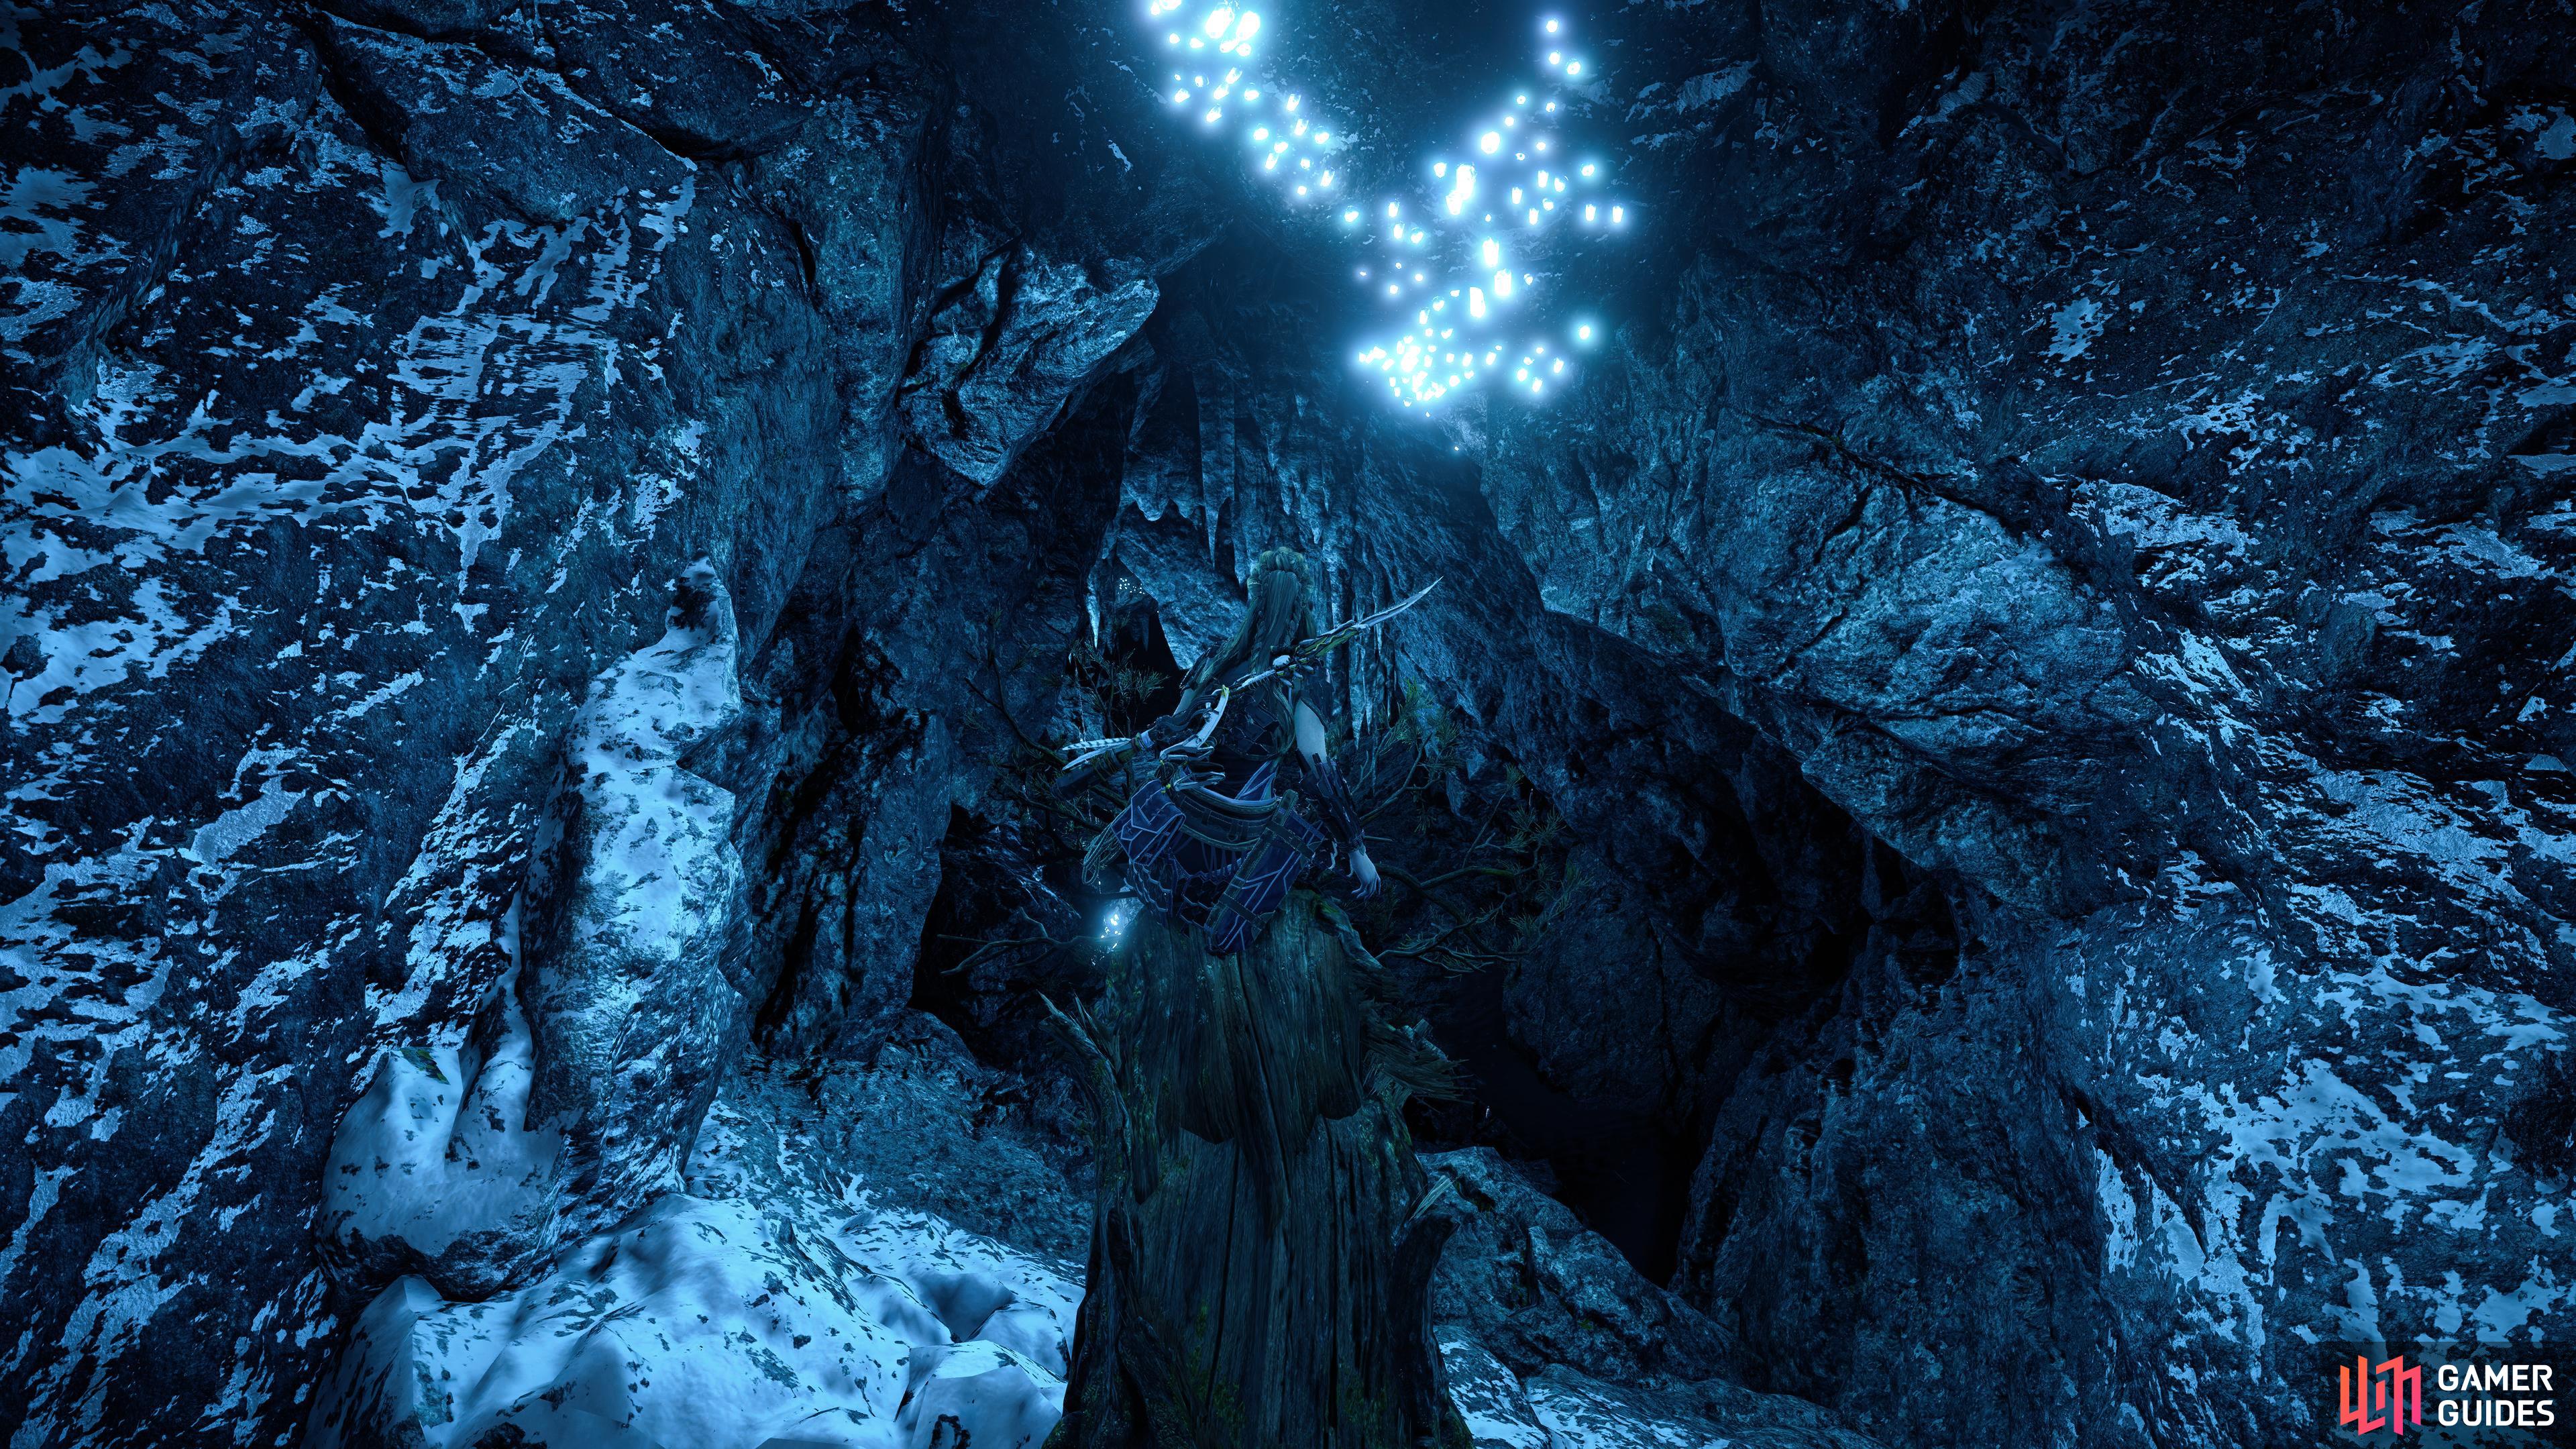 Aloy inspects the cave. 